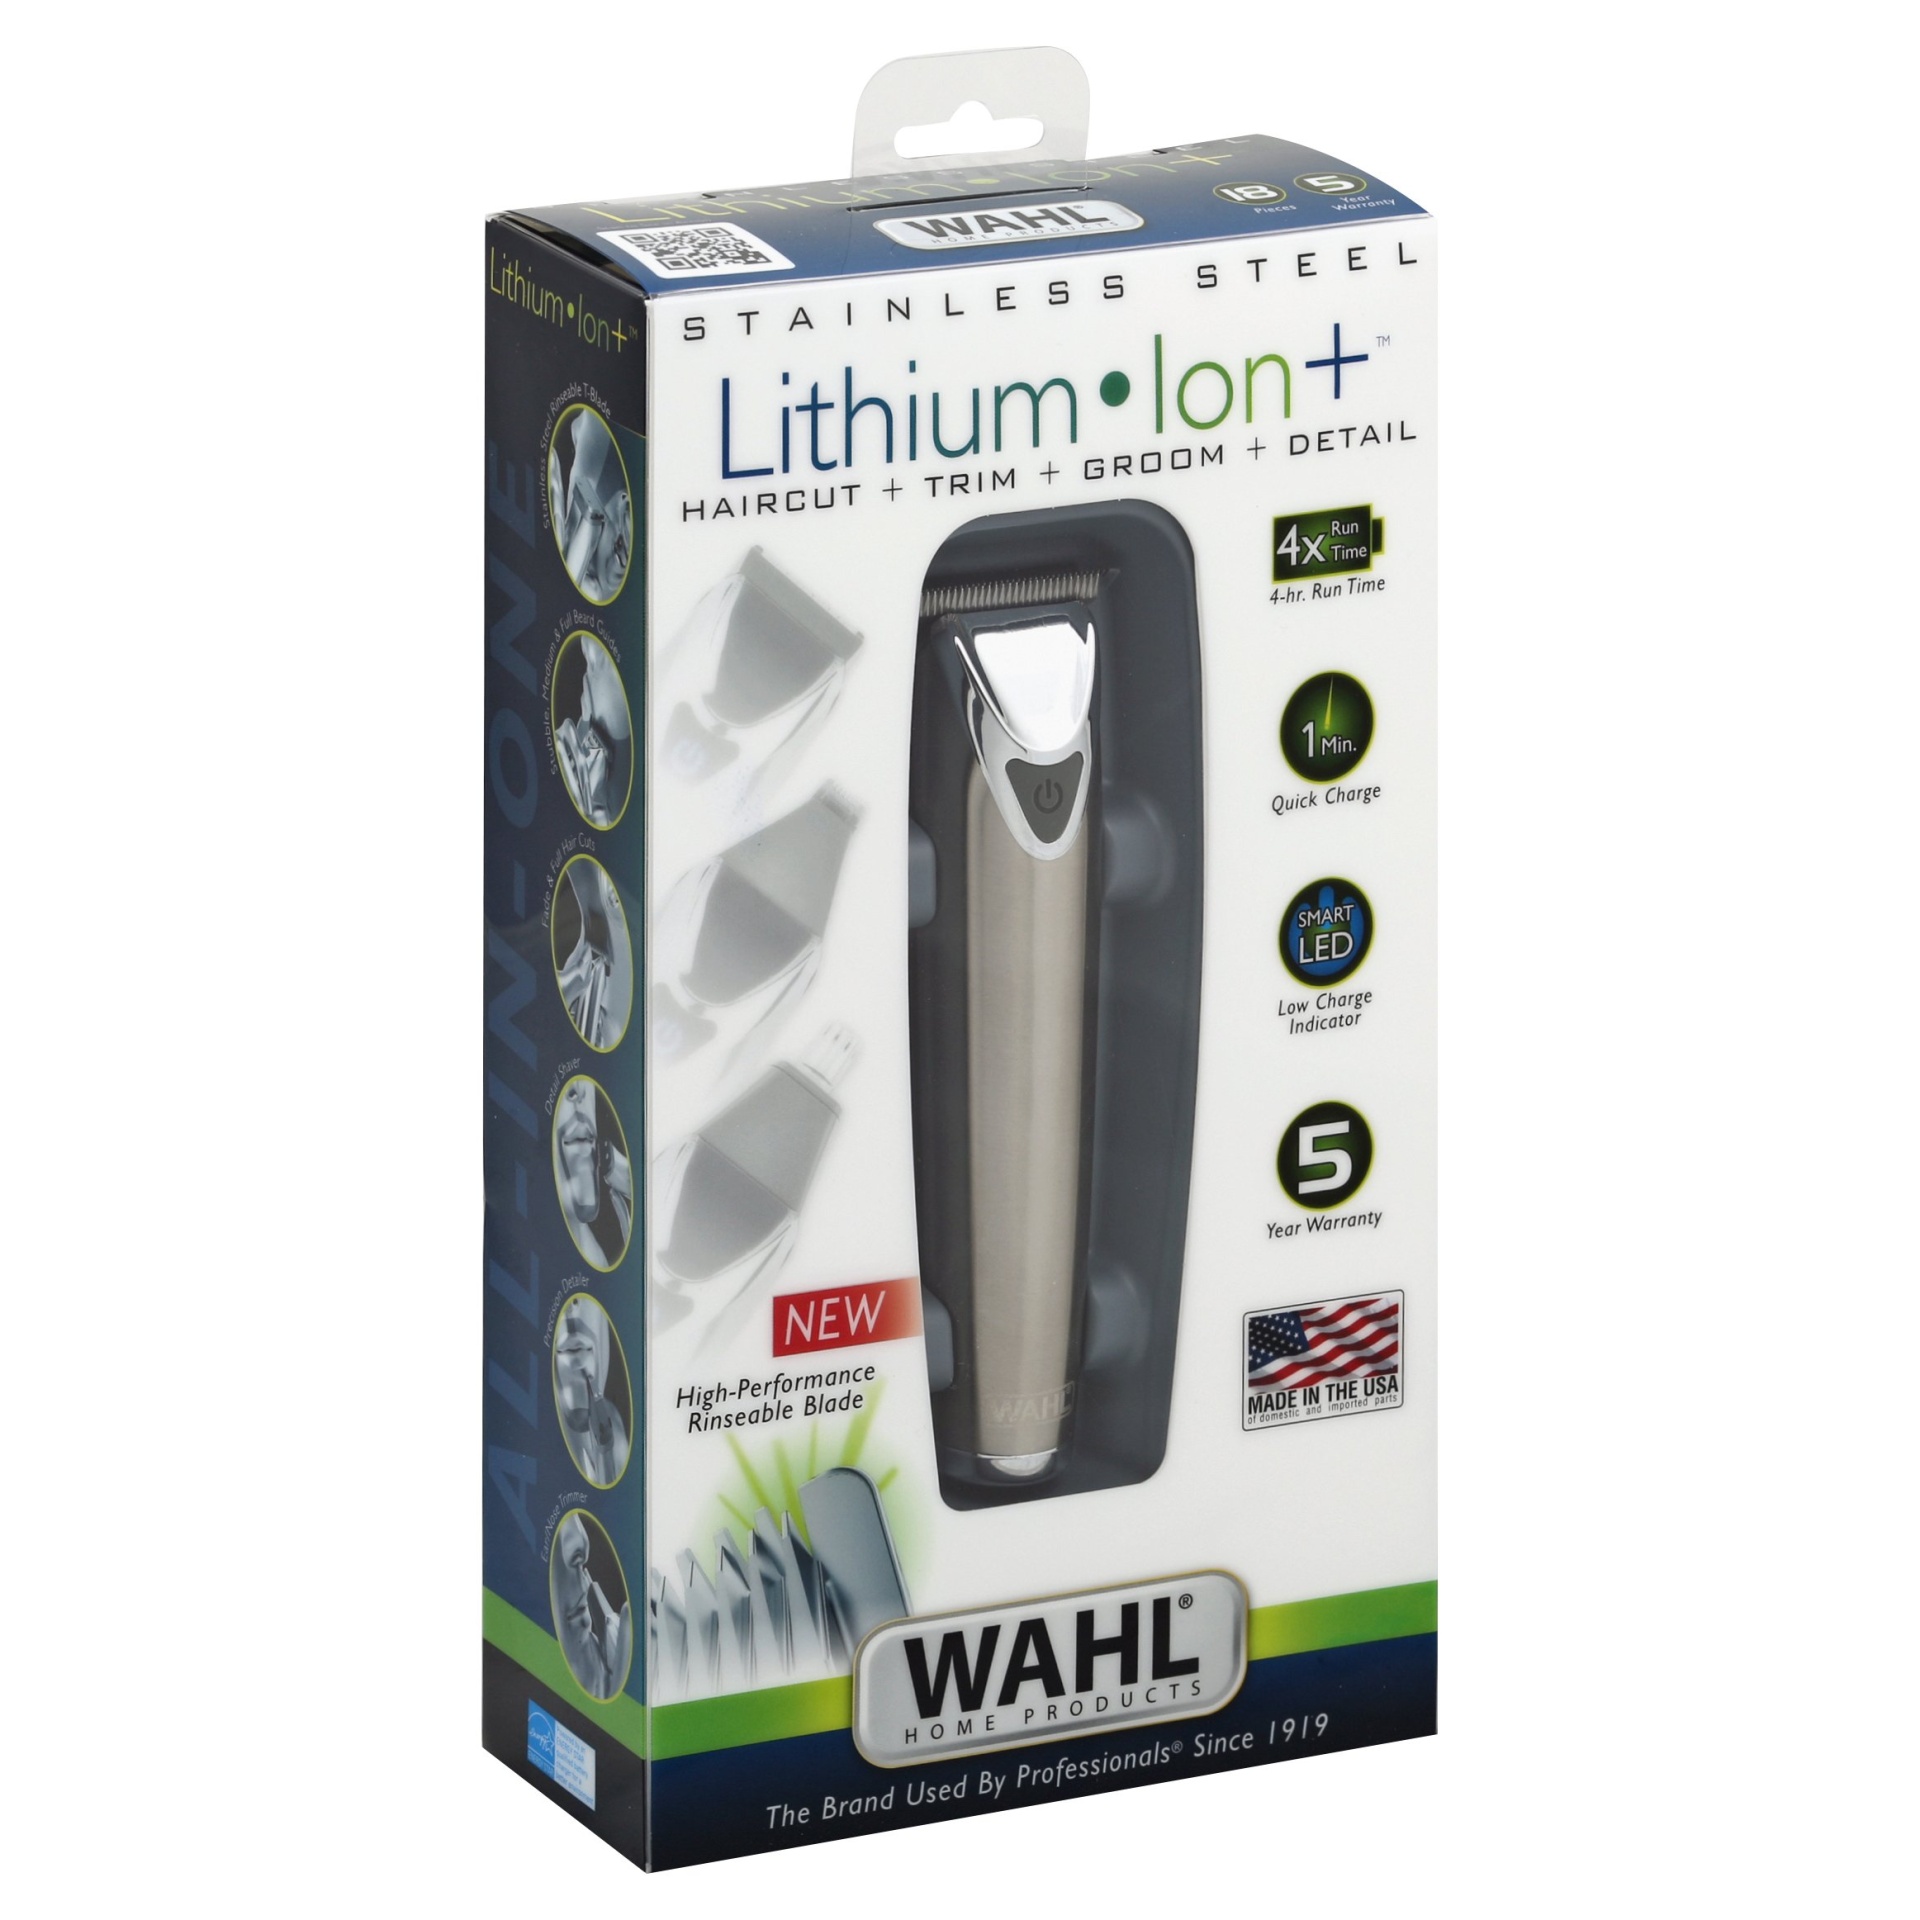 Wahl Stainless Lithium Ion Men's Multi Purpose Beard, Facial Trimmer And Total Body Groomer - 9818 1 ct | Shipt